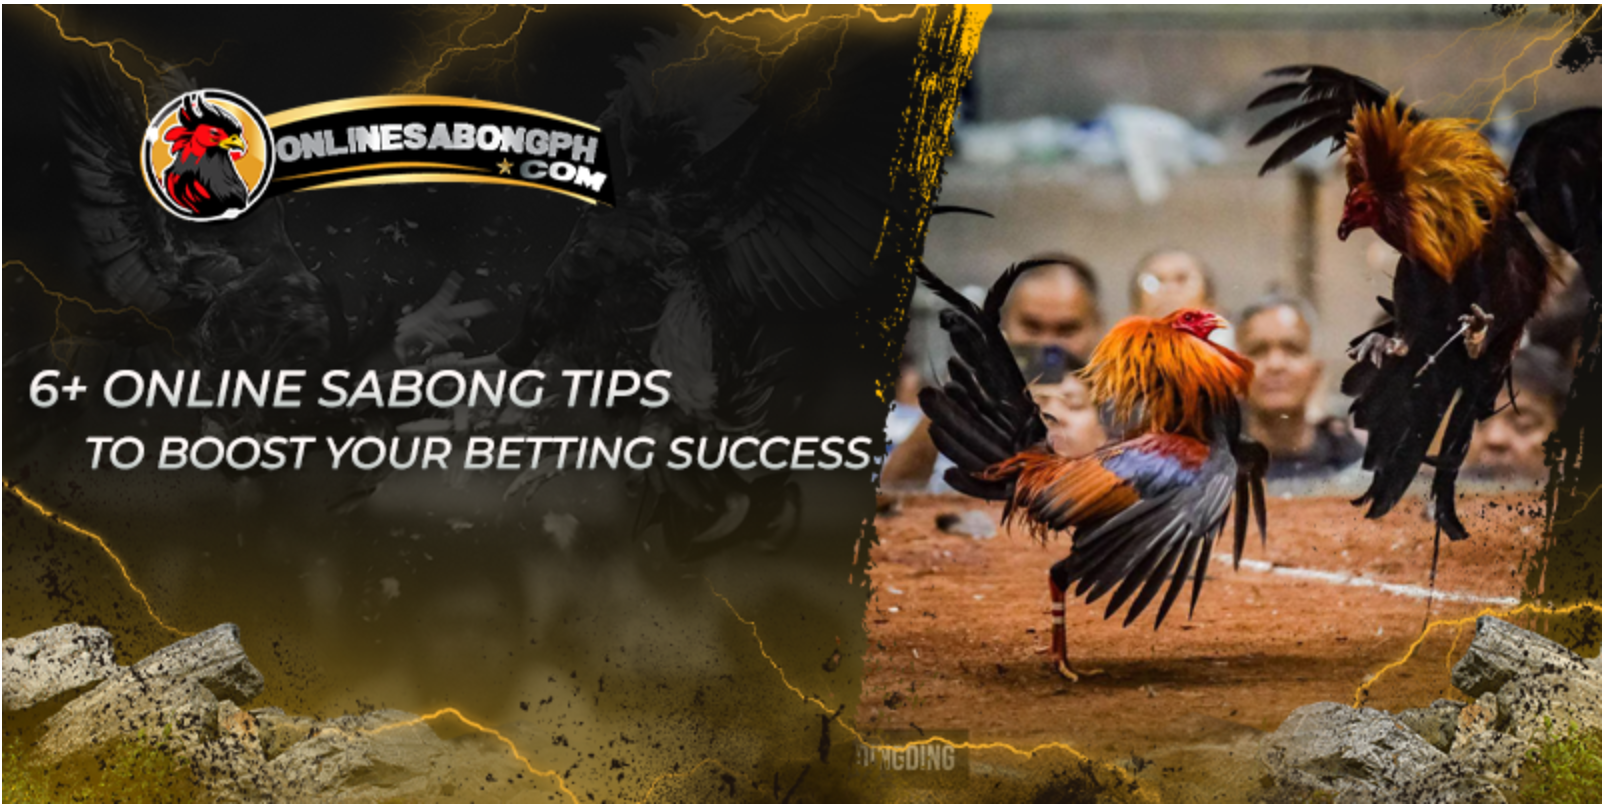 6+ Online Sabong Tips to Boost Your Betting Succes...